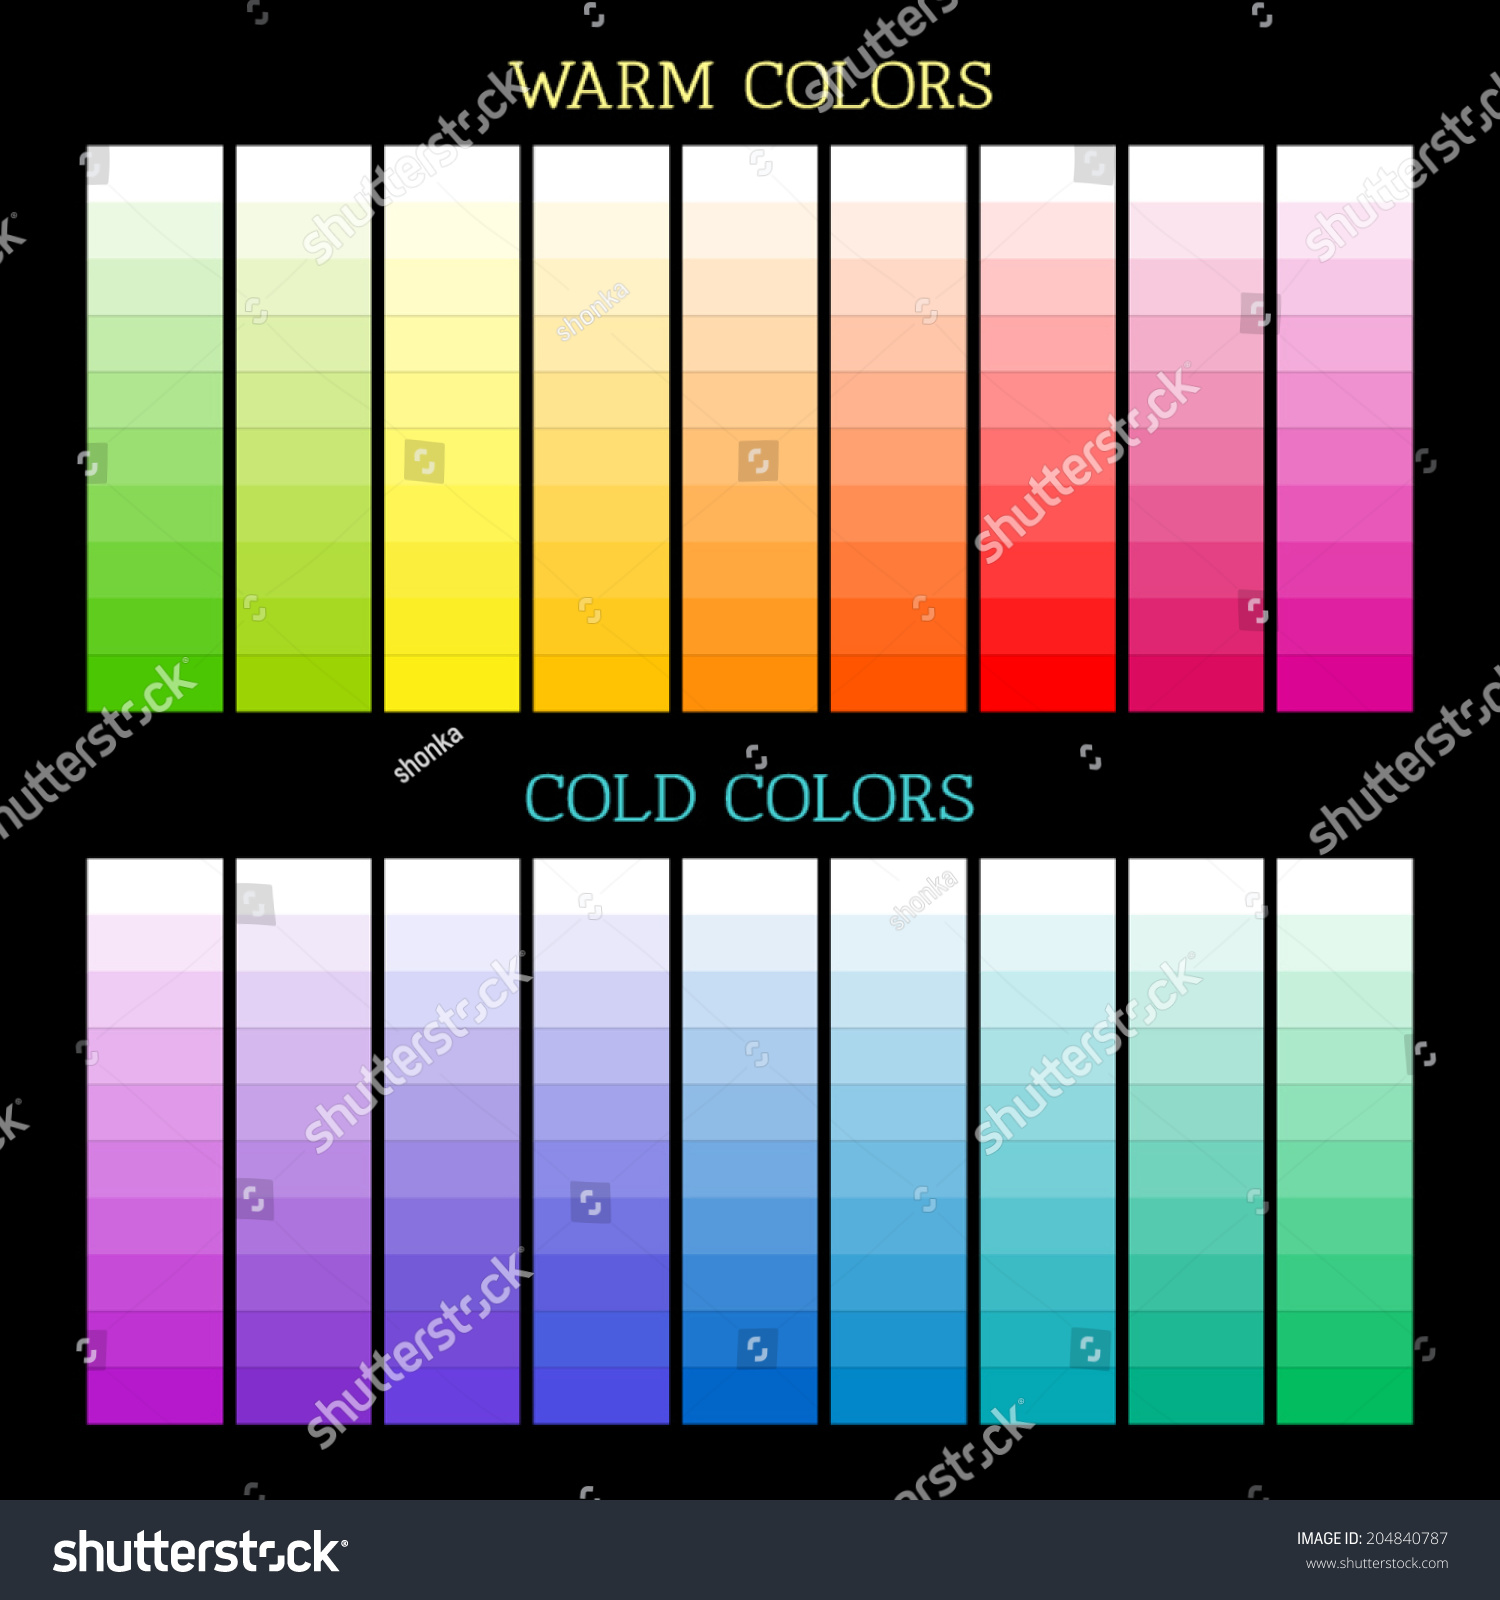 Cold colors. Warm and Cold Colors. Cold Color Palettes. Цвет warm. Cold Colors and warm Colors.